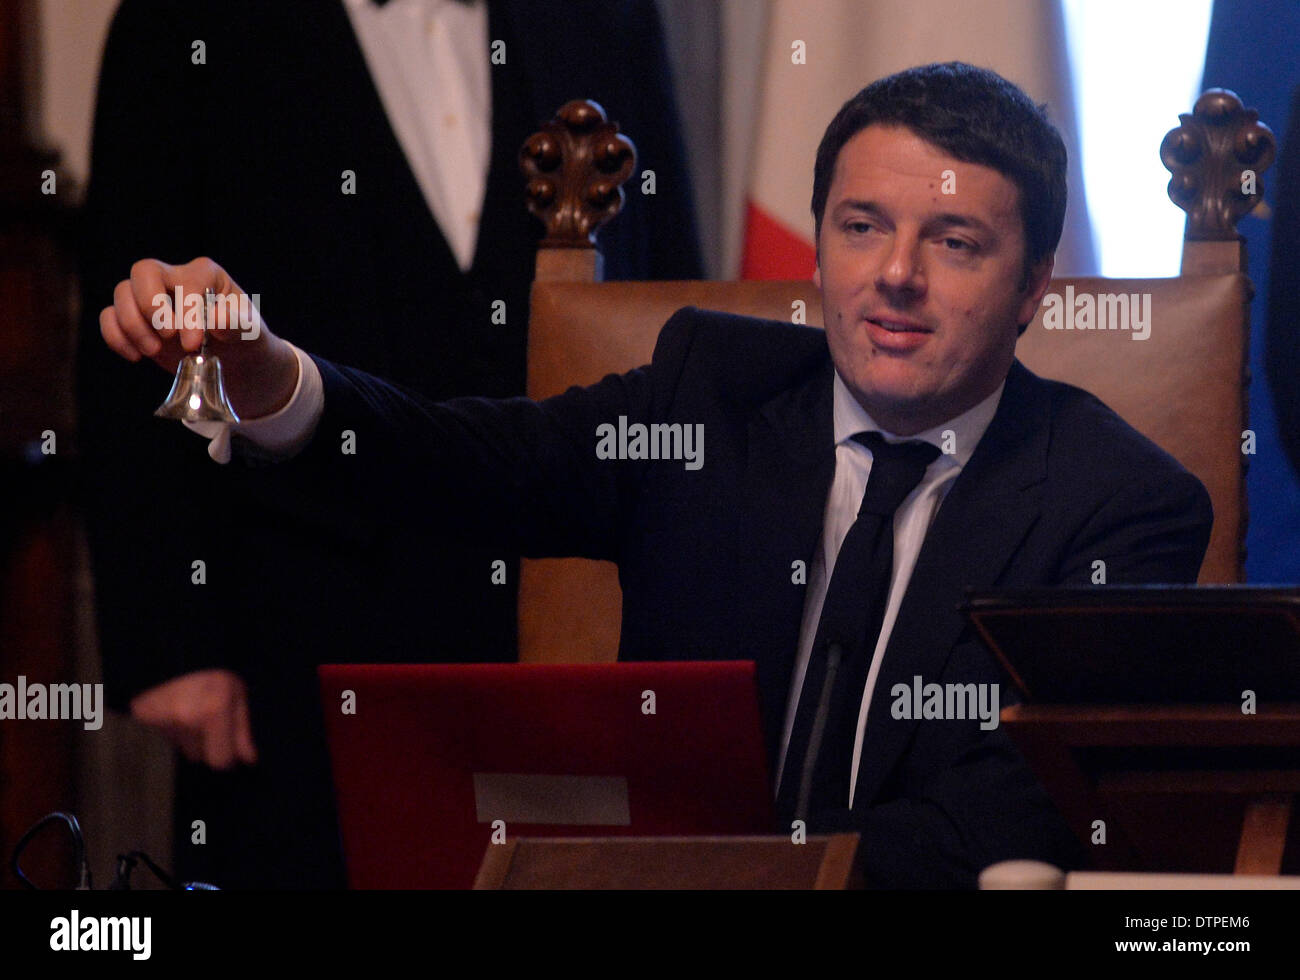 Rome, Italy. 22nd Feb, 2014. Italy'new prime minister Matteo Renzi rings the cabinet minister bell during the handover ceremony in Rome on February 22, 2014. Italy's new prime minister Matteo Renzi and his cabinet ministers were sworn in on Saturday before Italian President Giorgio Napolitano, starting their task to accelerate reforms and revive the troubled economy. Credit:  Alberto Lingria/Xinhua/Alamy Live News Stock Photo